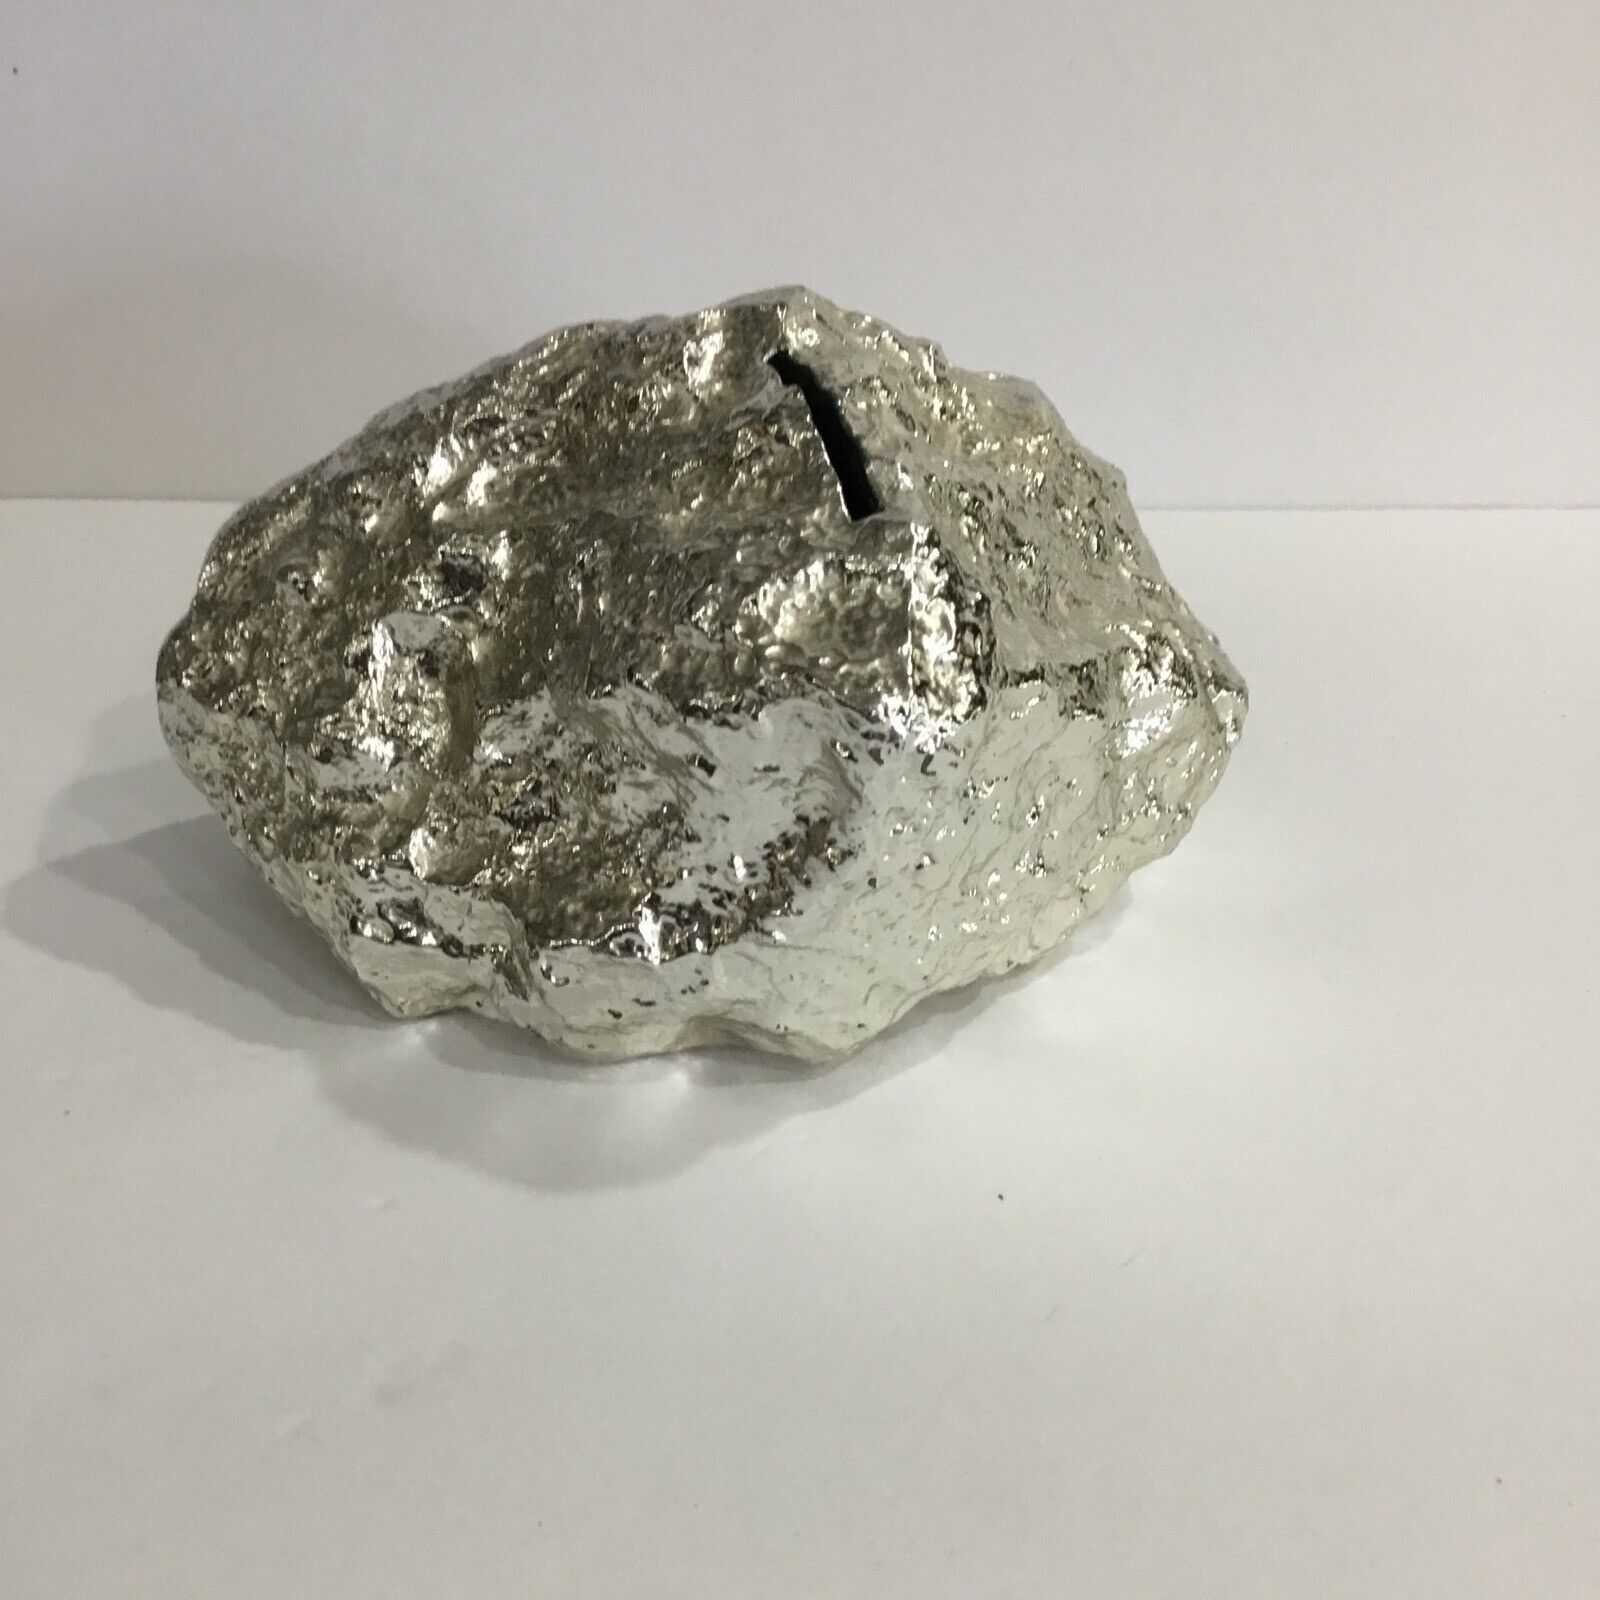 Vintage Silver Nugget Coin Bank A.N. Brooks 1970s  Cast Iron Saving Bank USA